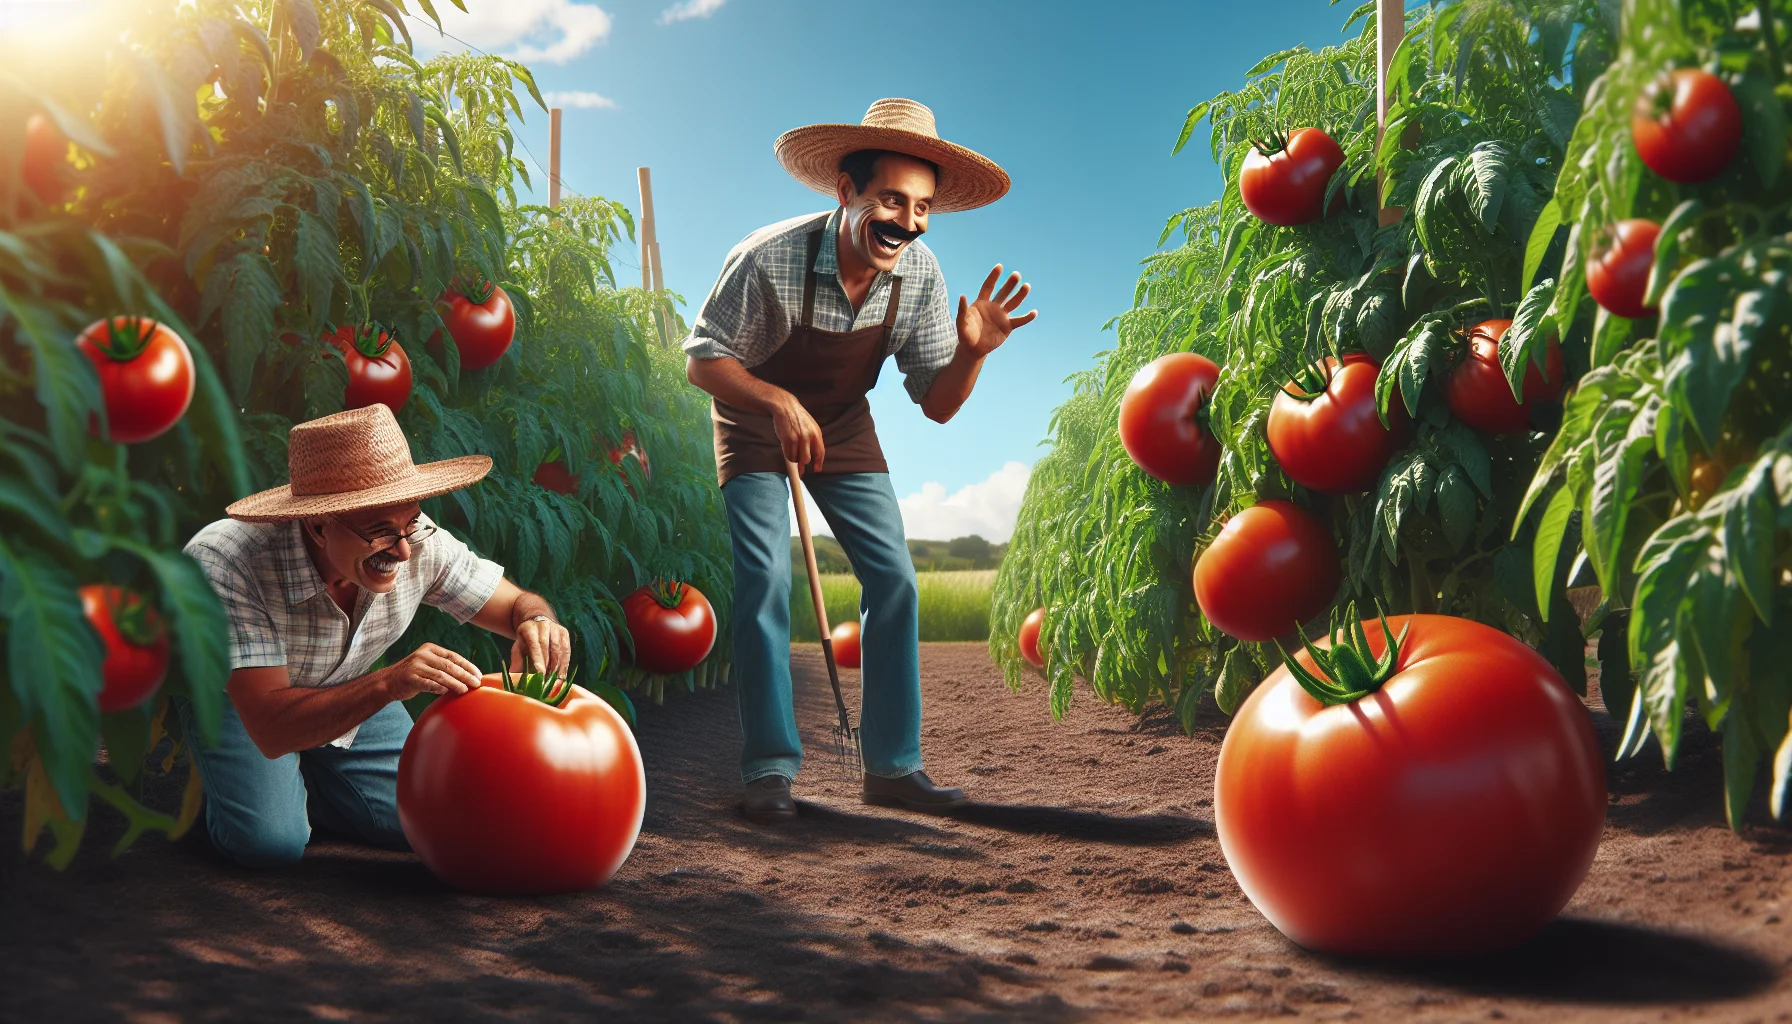 Visualize a humorous scenario revolving around tomato farming. The scene takes place in a sun-bathed garden filled with lush green tomato plants featuring big, juicy red tomatoes. There should be a Hispanic male gardener, with a straw hat and an unfading smile, having light-hearted interactions with the plants, perhaps talking to them or trying to chase a tomato rolling away. The imagery should be enticing and promote the joy of gardening.